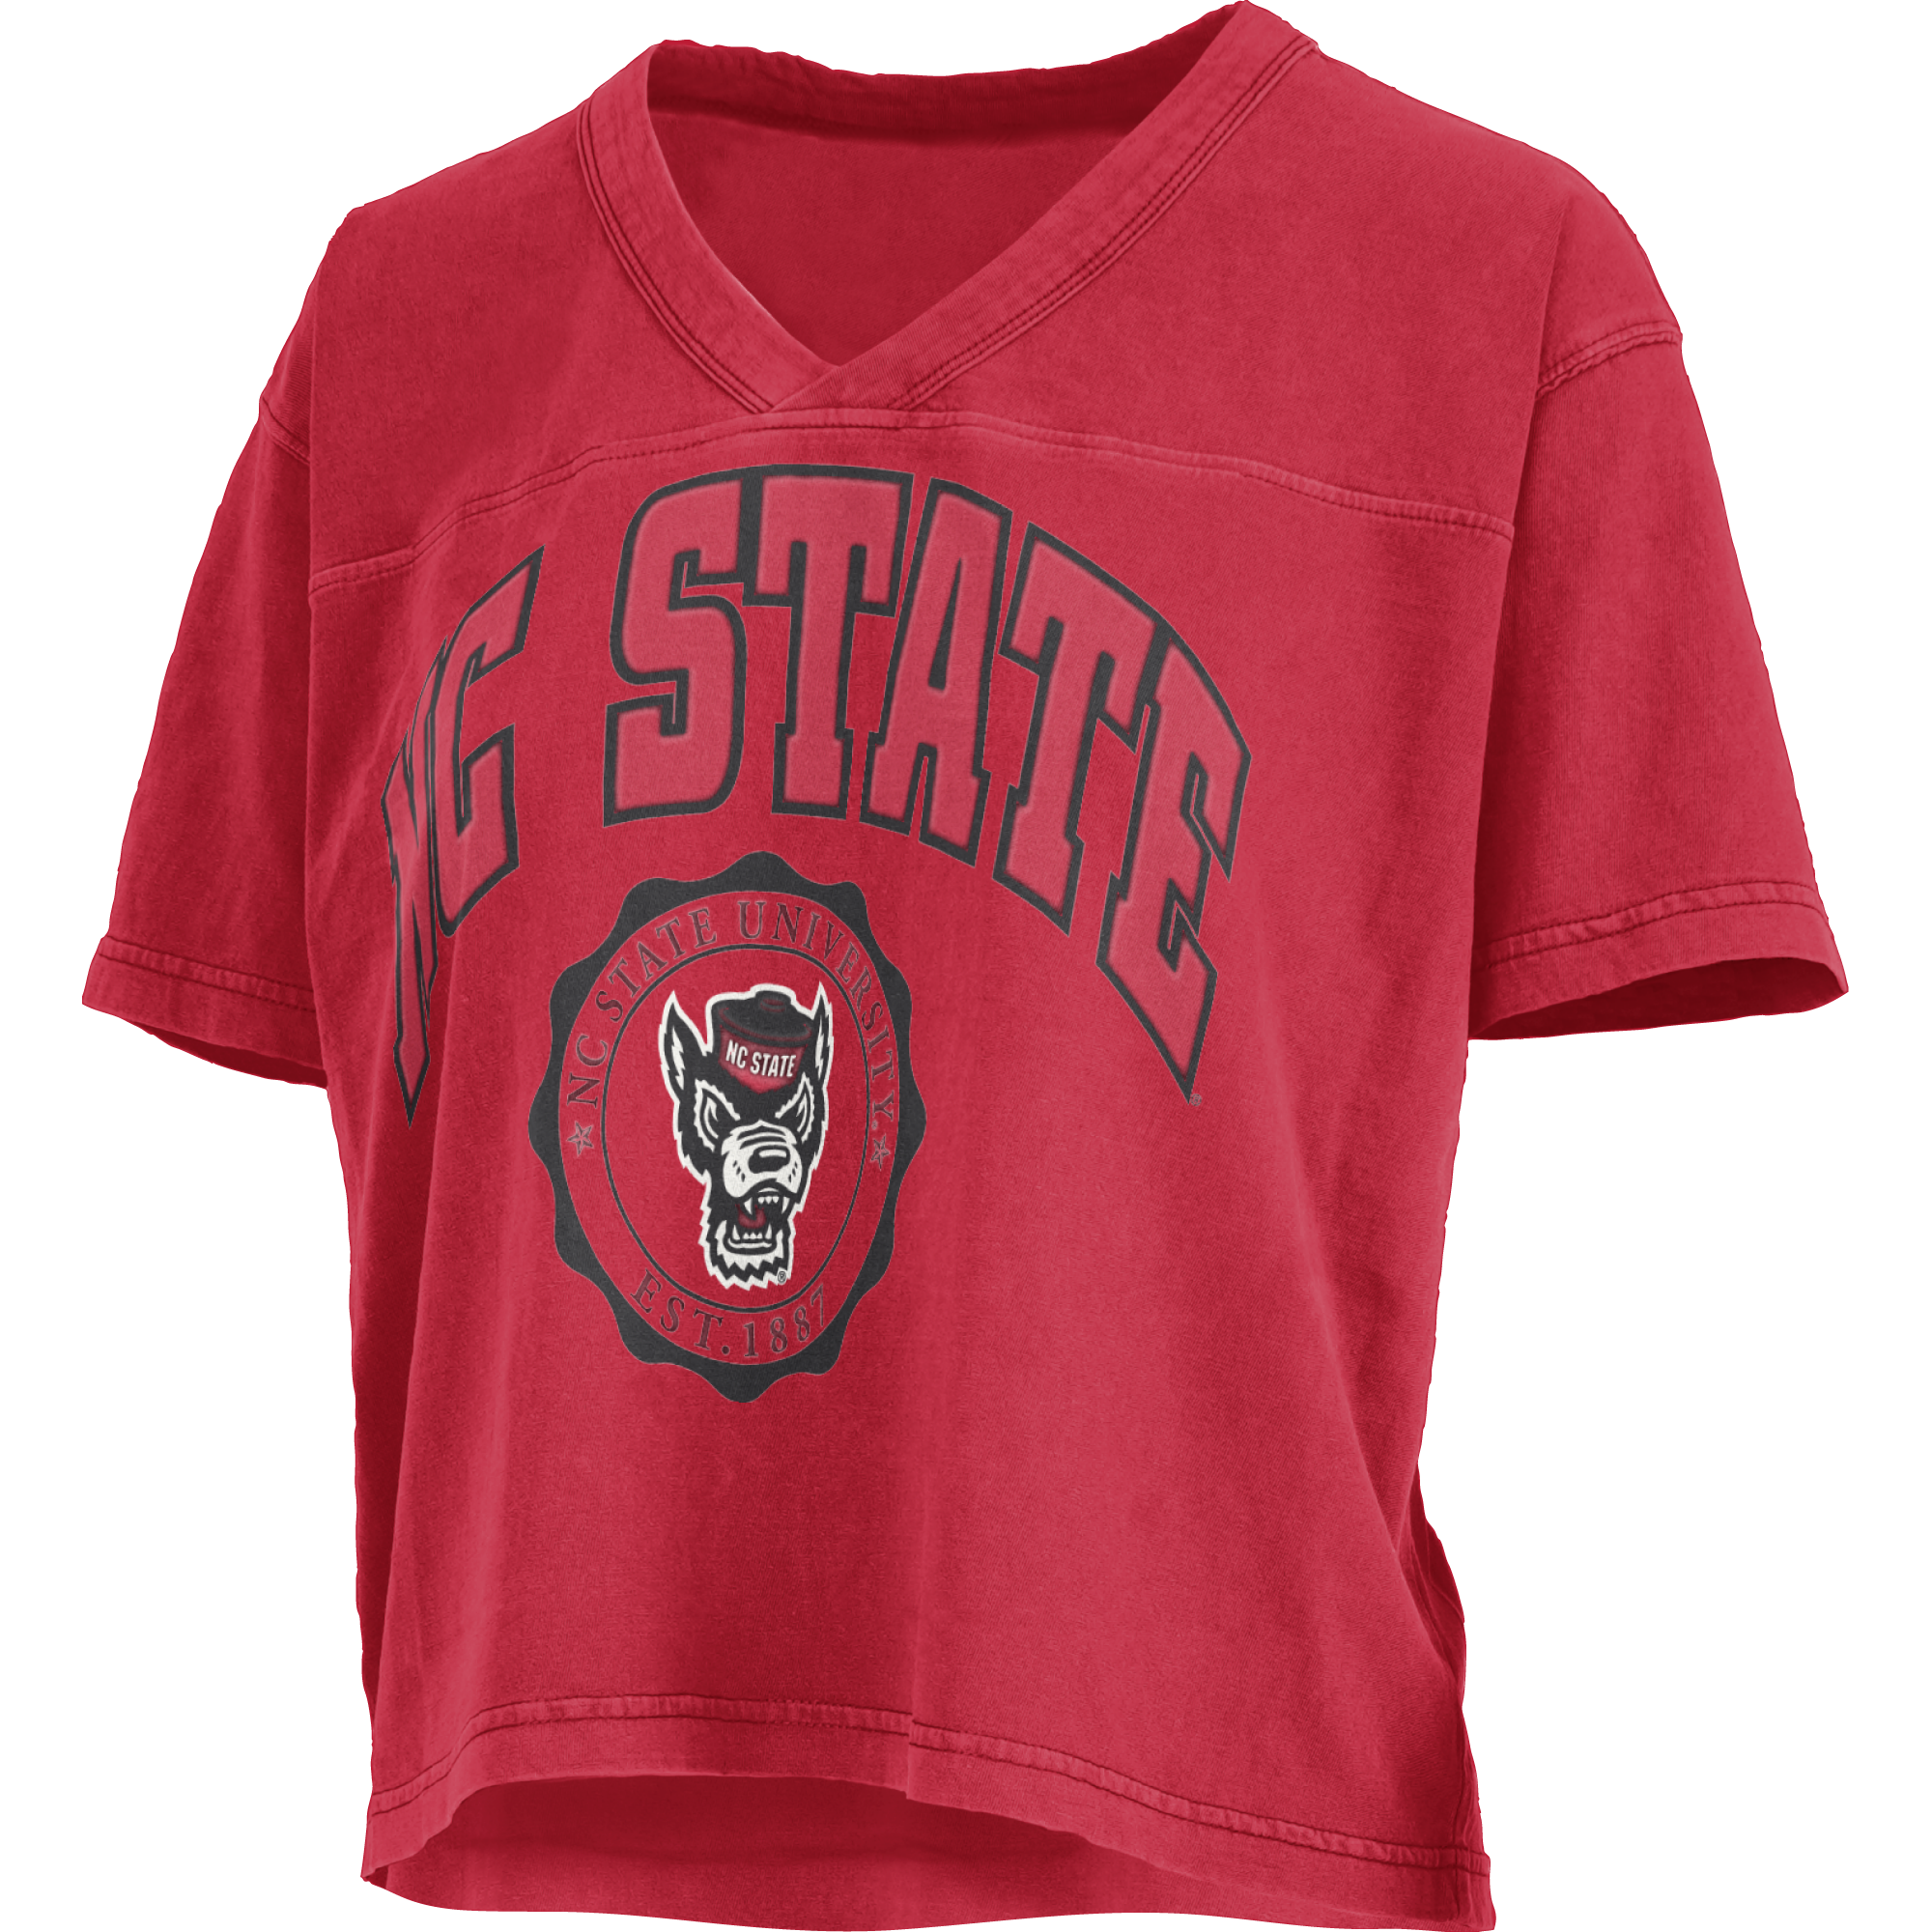 NC State Wolfpack Women's Red Edith Puff Oversized Crop Top